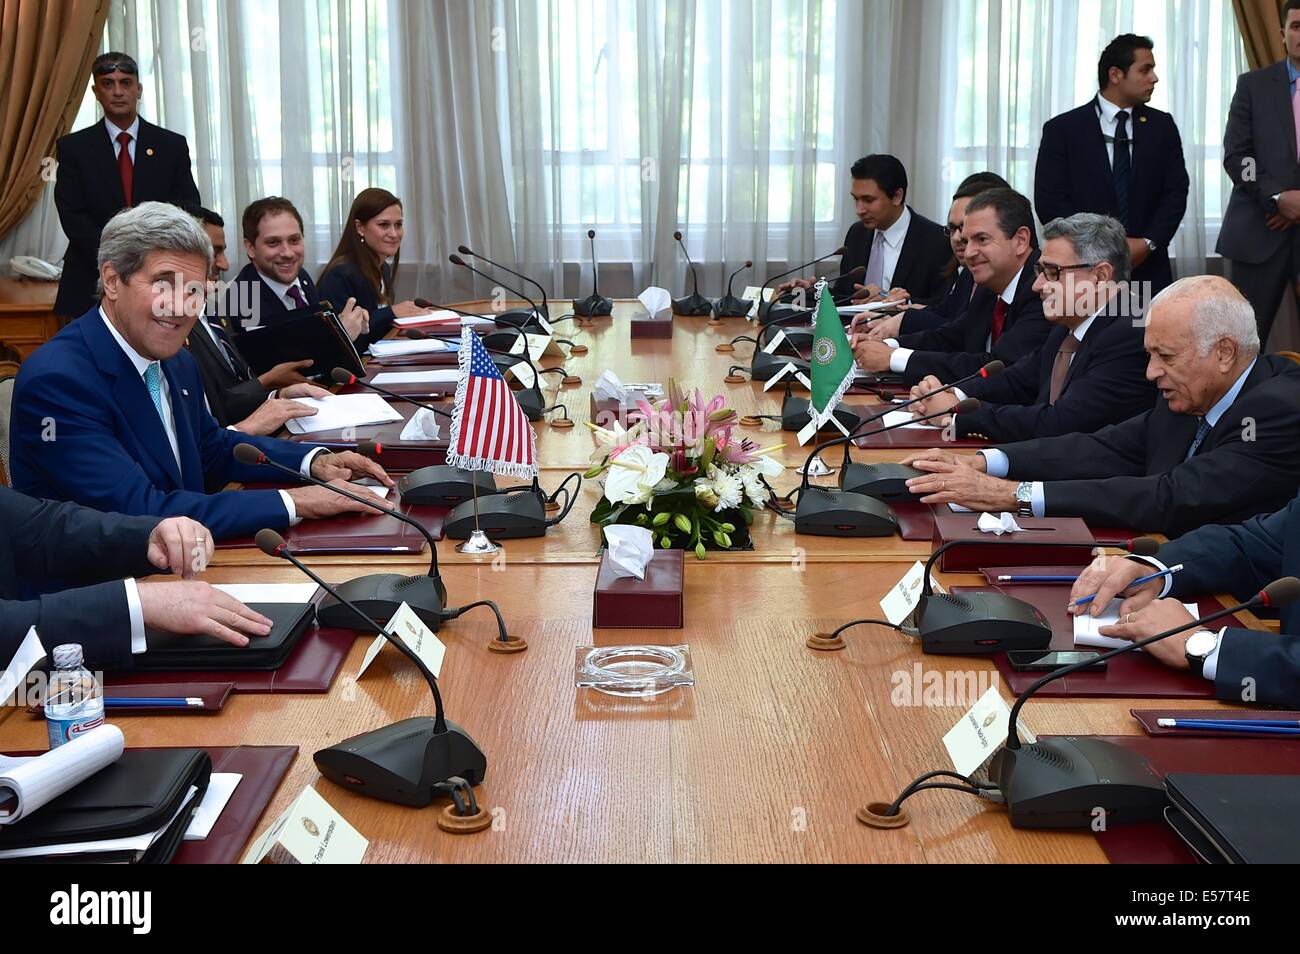 Cairo, Egypt. 22st July, 2014. US Secretary of State John Kerry sits across from Arab League Secretary-General Nabil al-Araby during discussions on a possible ceasefire between Israeli and Hamas forces fighting in the Gaza Strip at Arab League Headquarters July 22, 2014 in Cairo, Egypt. Credit:  Planetpix/Alamy Live News Stock Photo